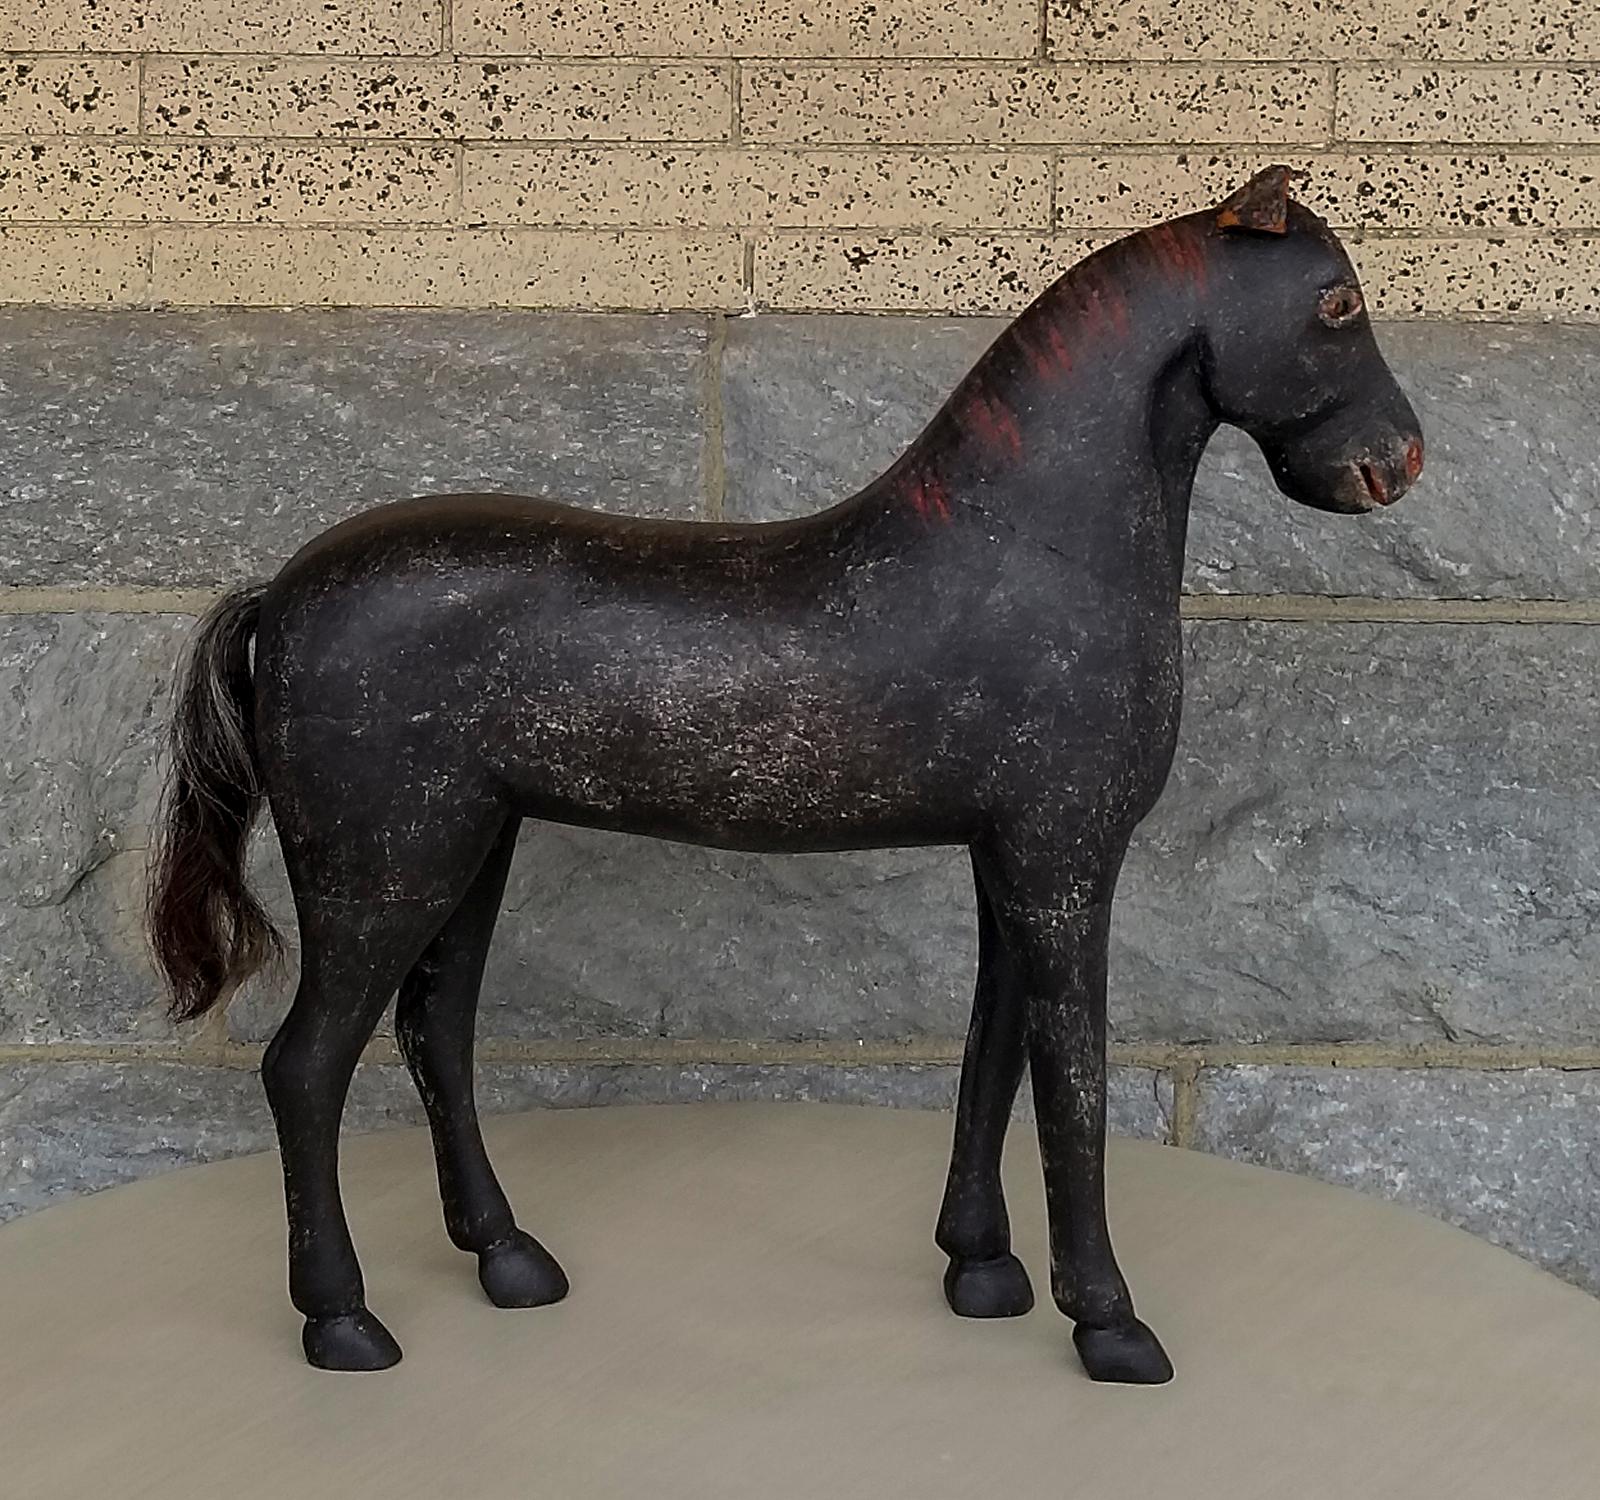 Toy horse from the Gemla Toy factory, Sweden, circa 1890. Original black surface with red painted mane, horse hair tail, and leather ears. Very sweet expression.